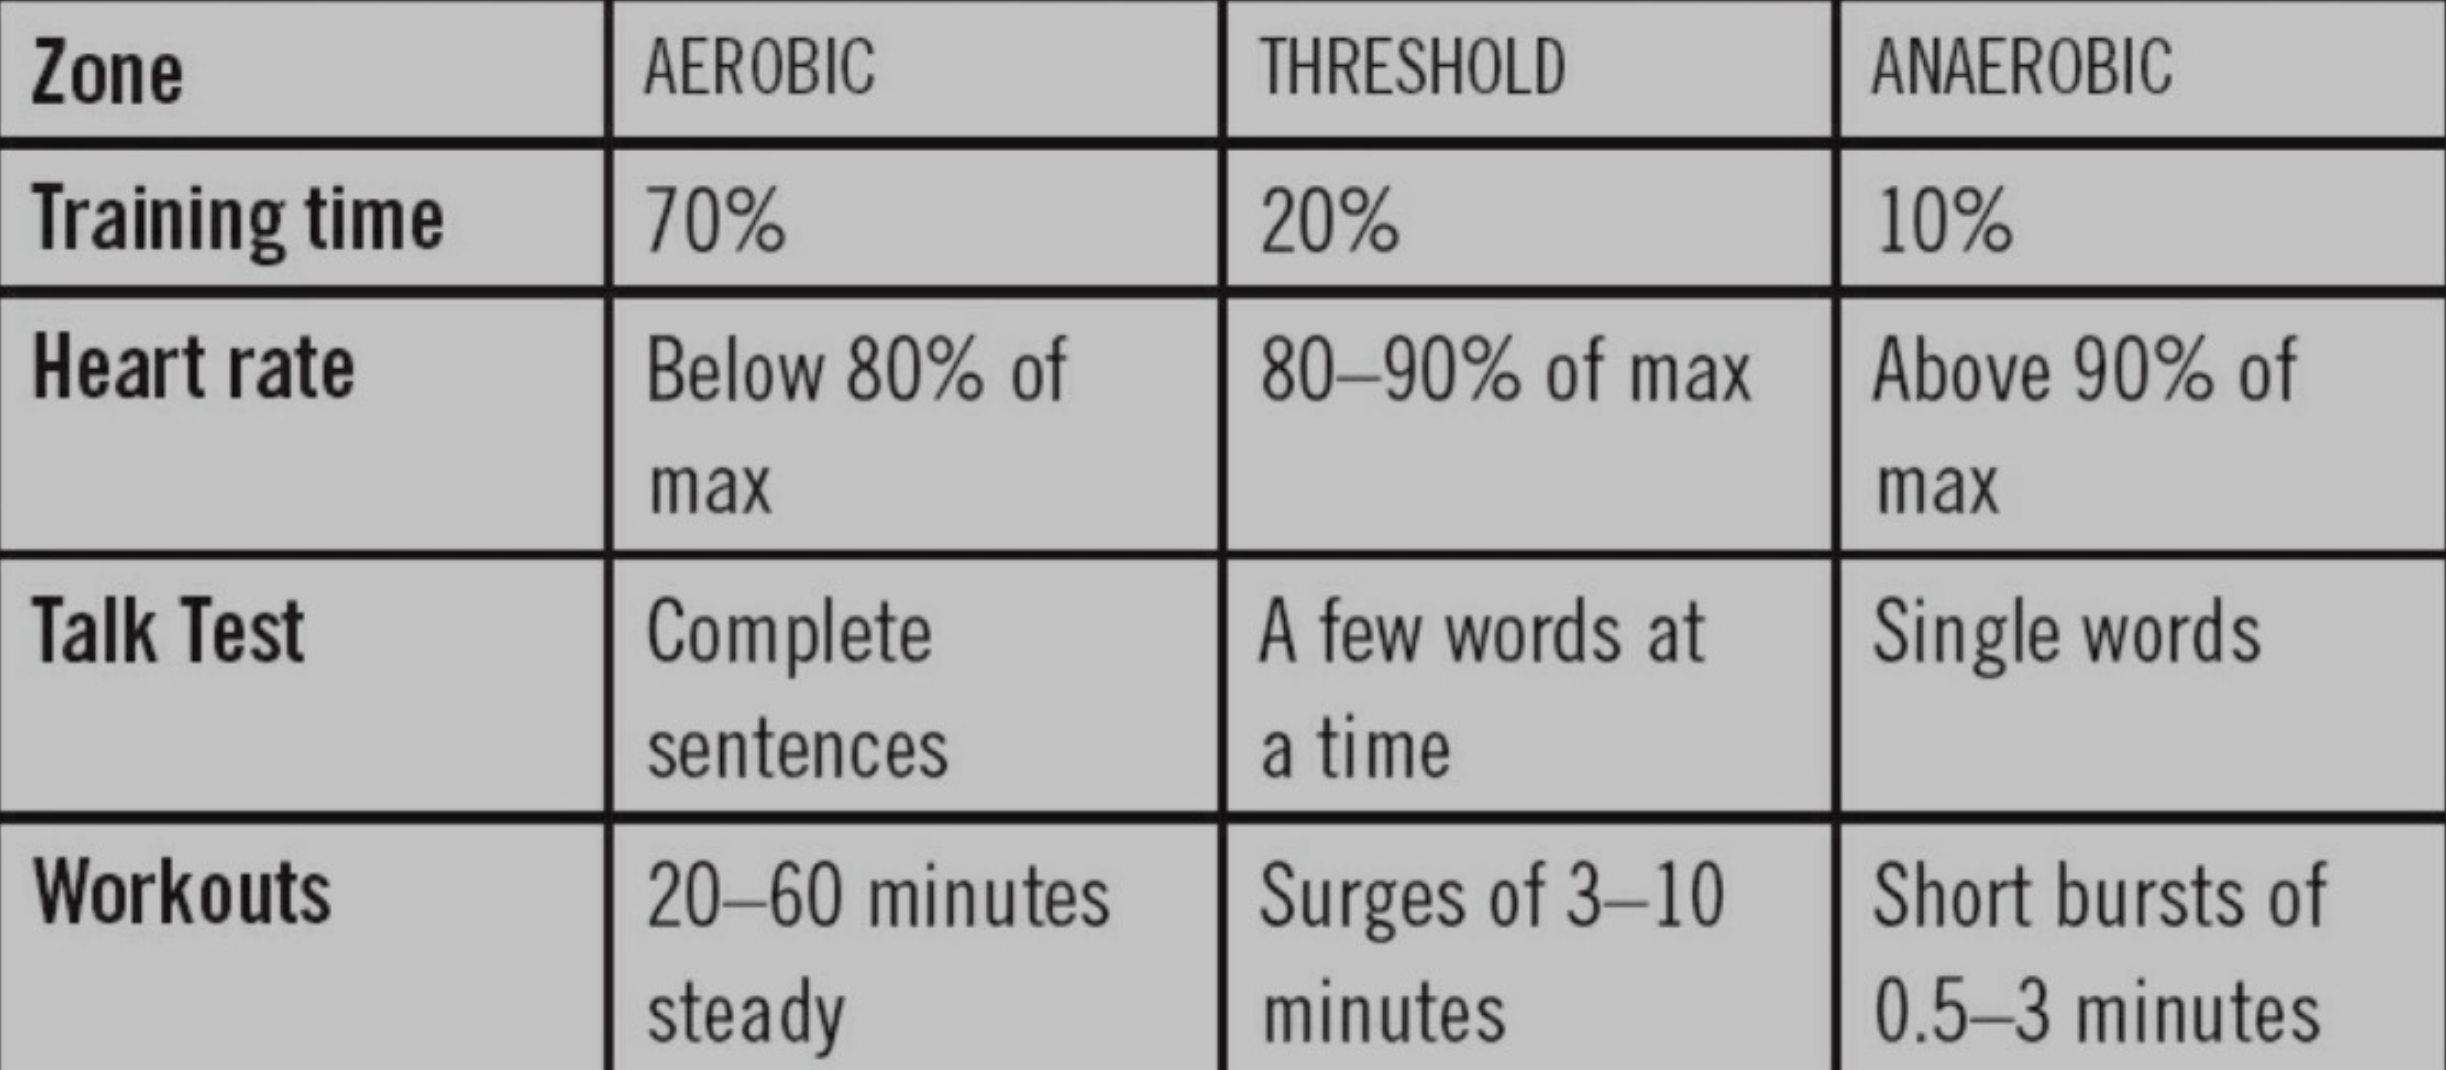 Aerobic workout chart from book.